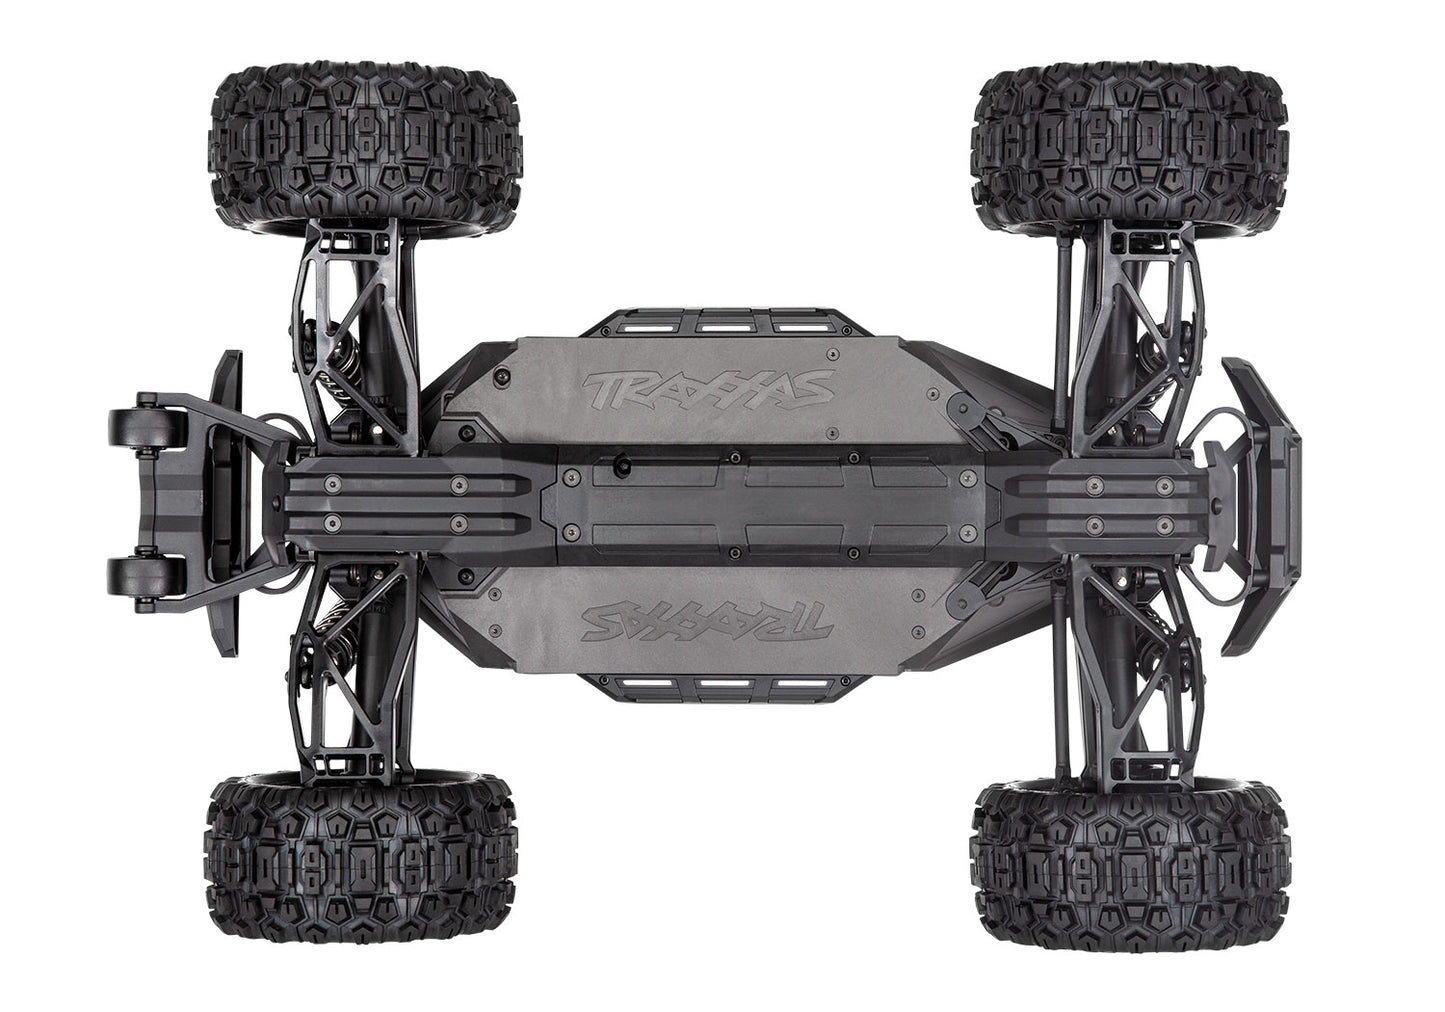 Traxxas Maxx with 4S ESC - Rock 'N Roll 1/10 Scale 4WD Brushless Electric Monster Truck